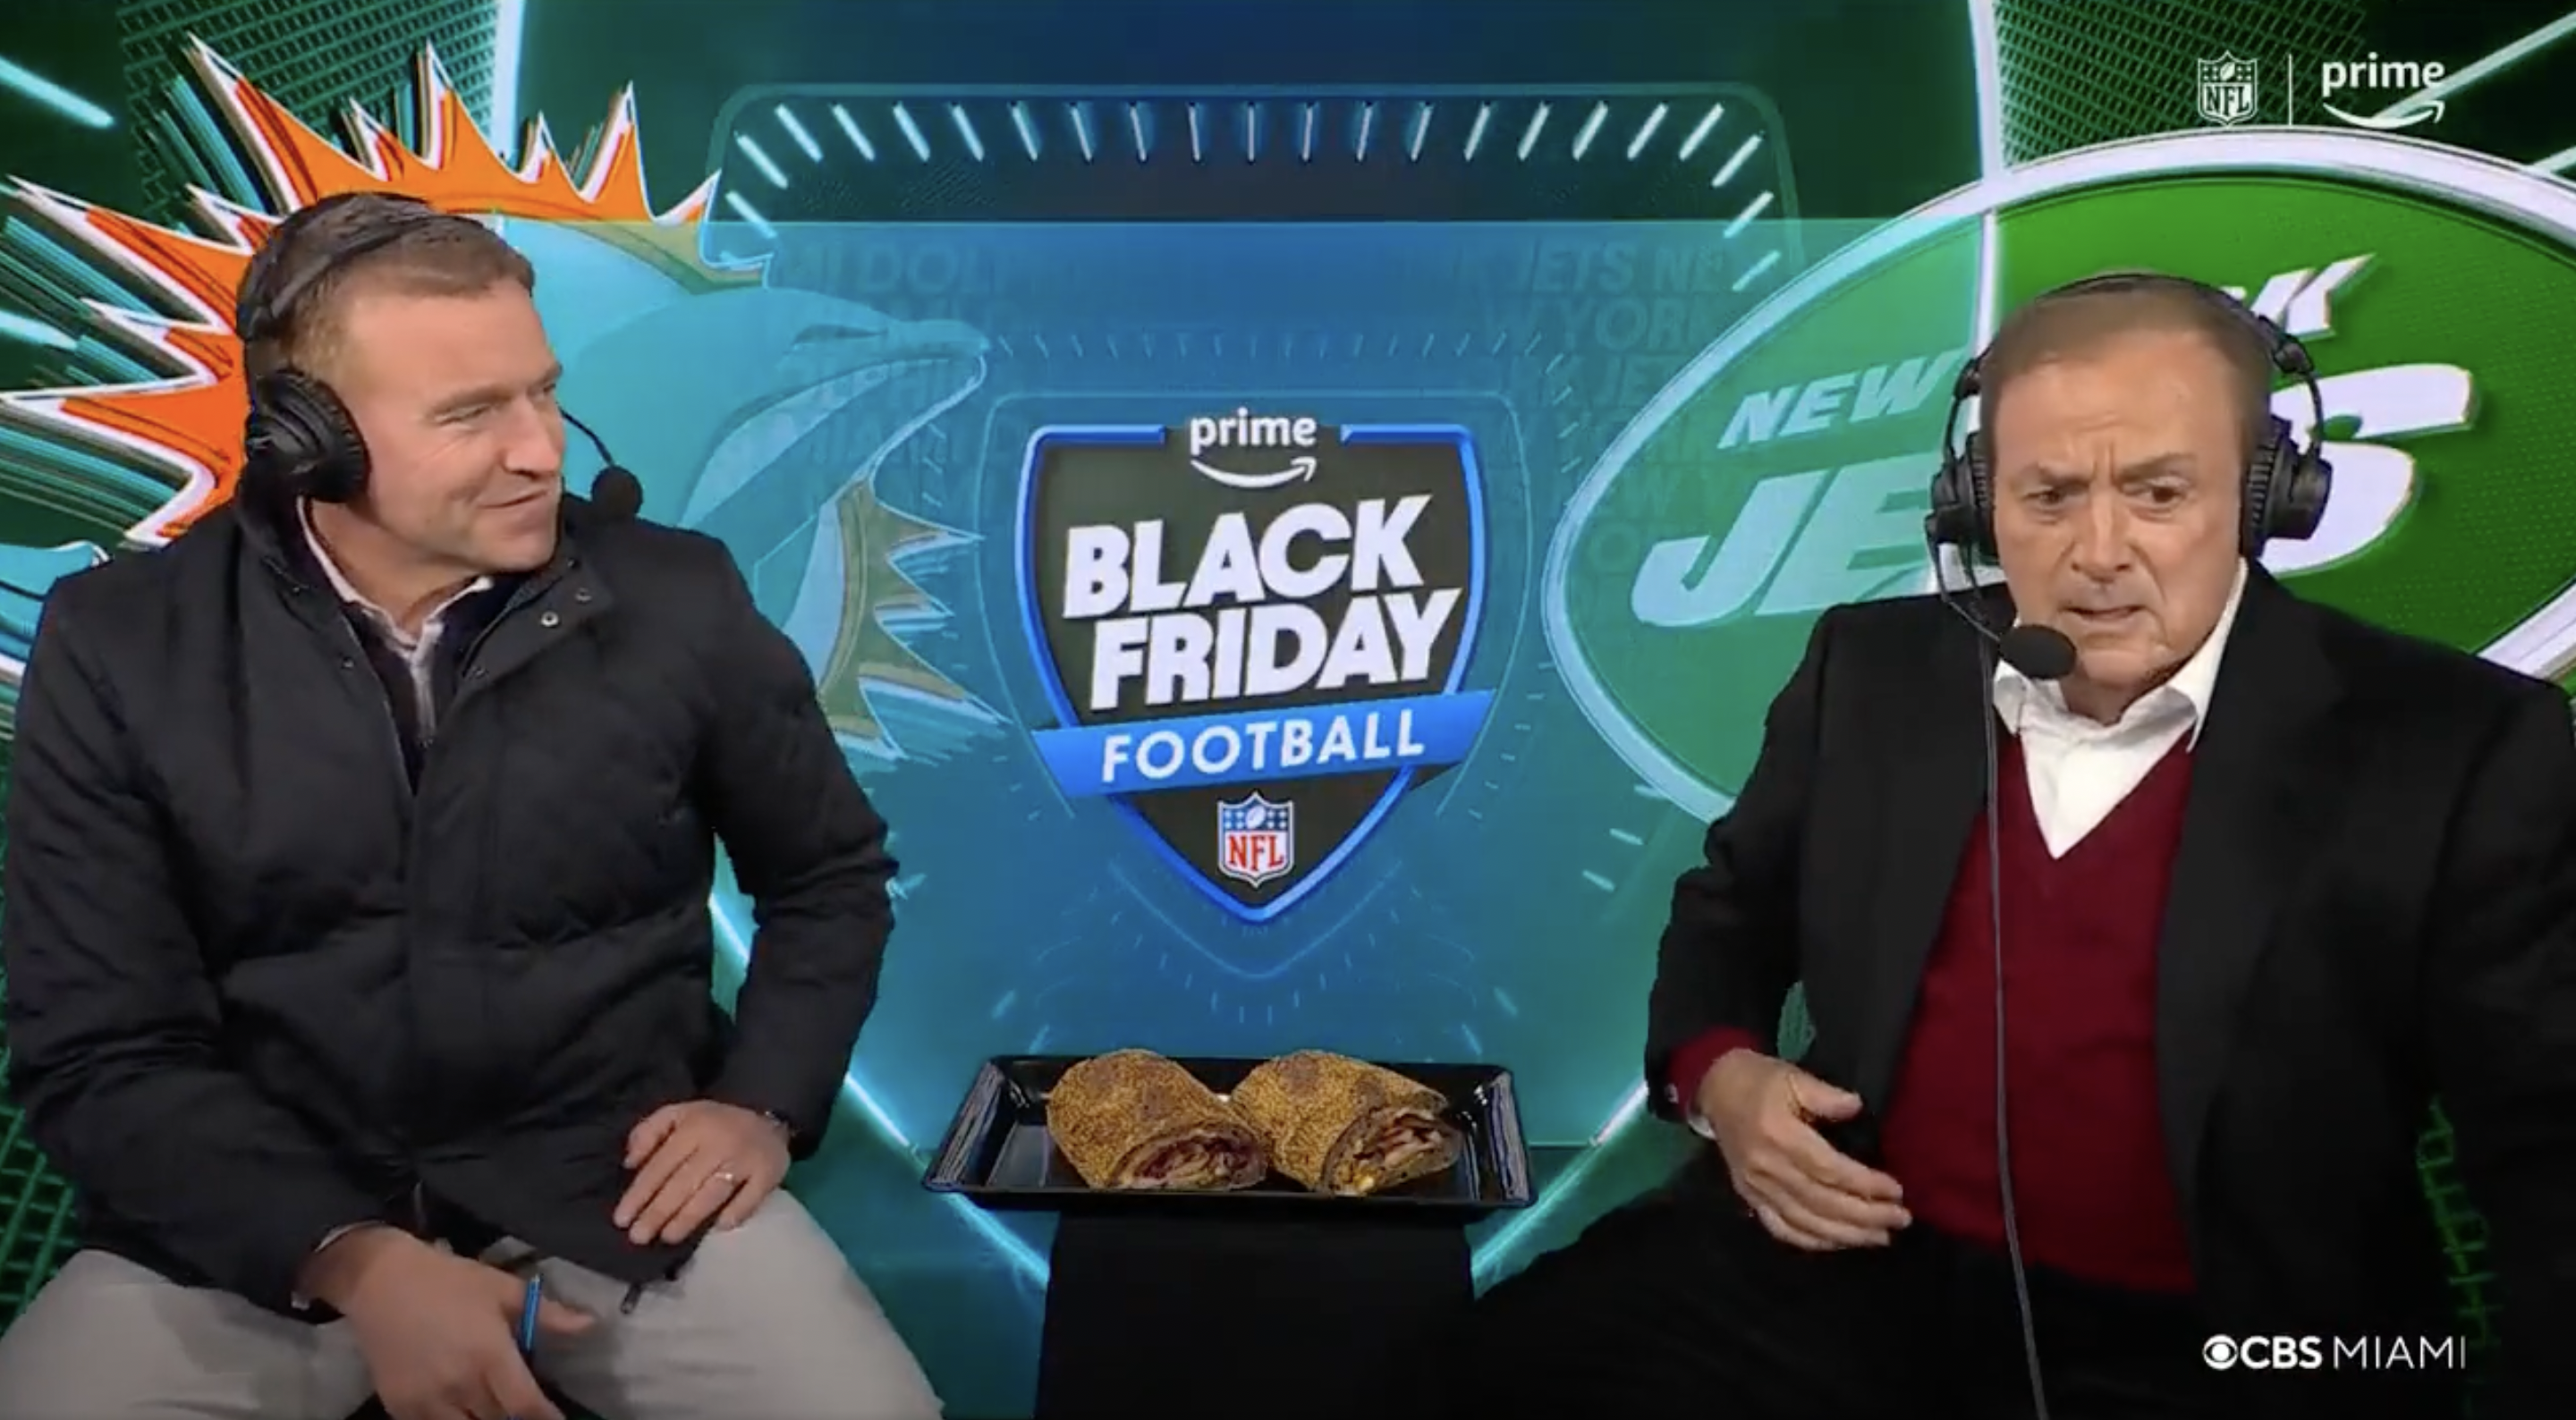 Al Michaels alongside Kirk Herbstreit calling the Black Friday game between the Jets and the Dolphins.